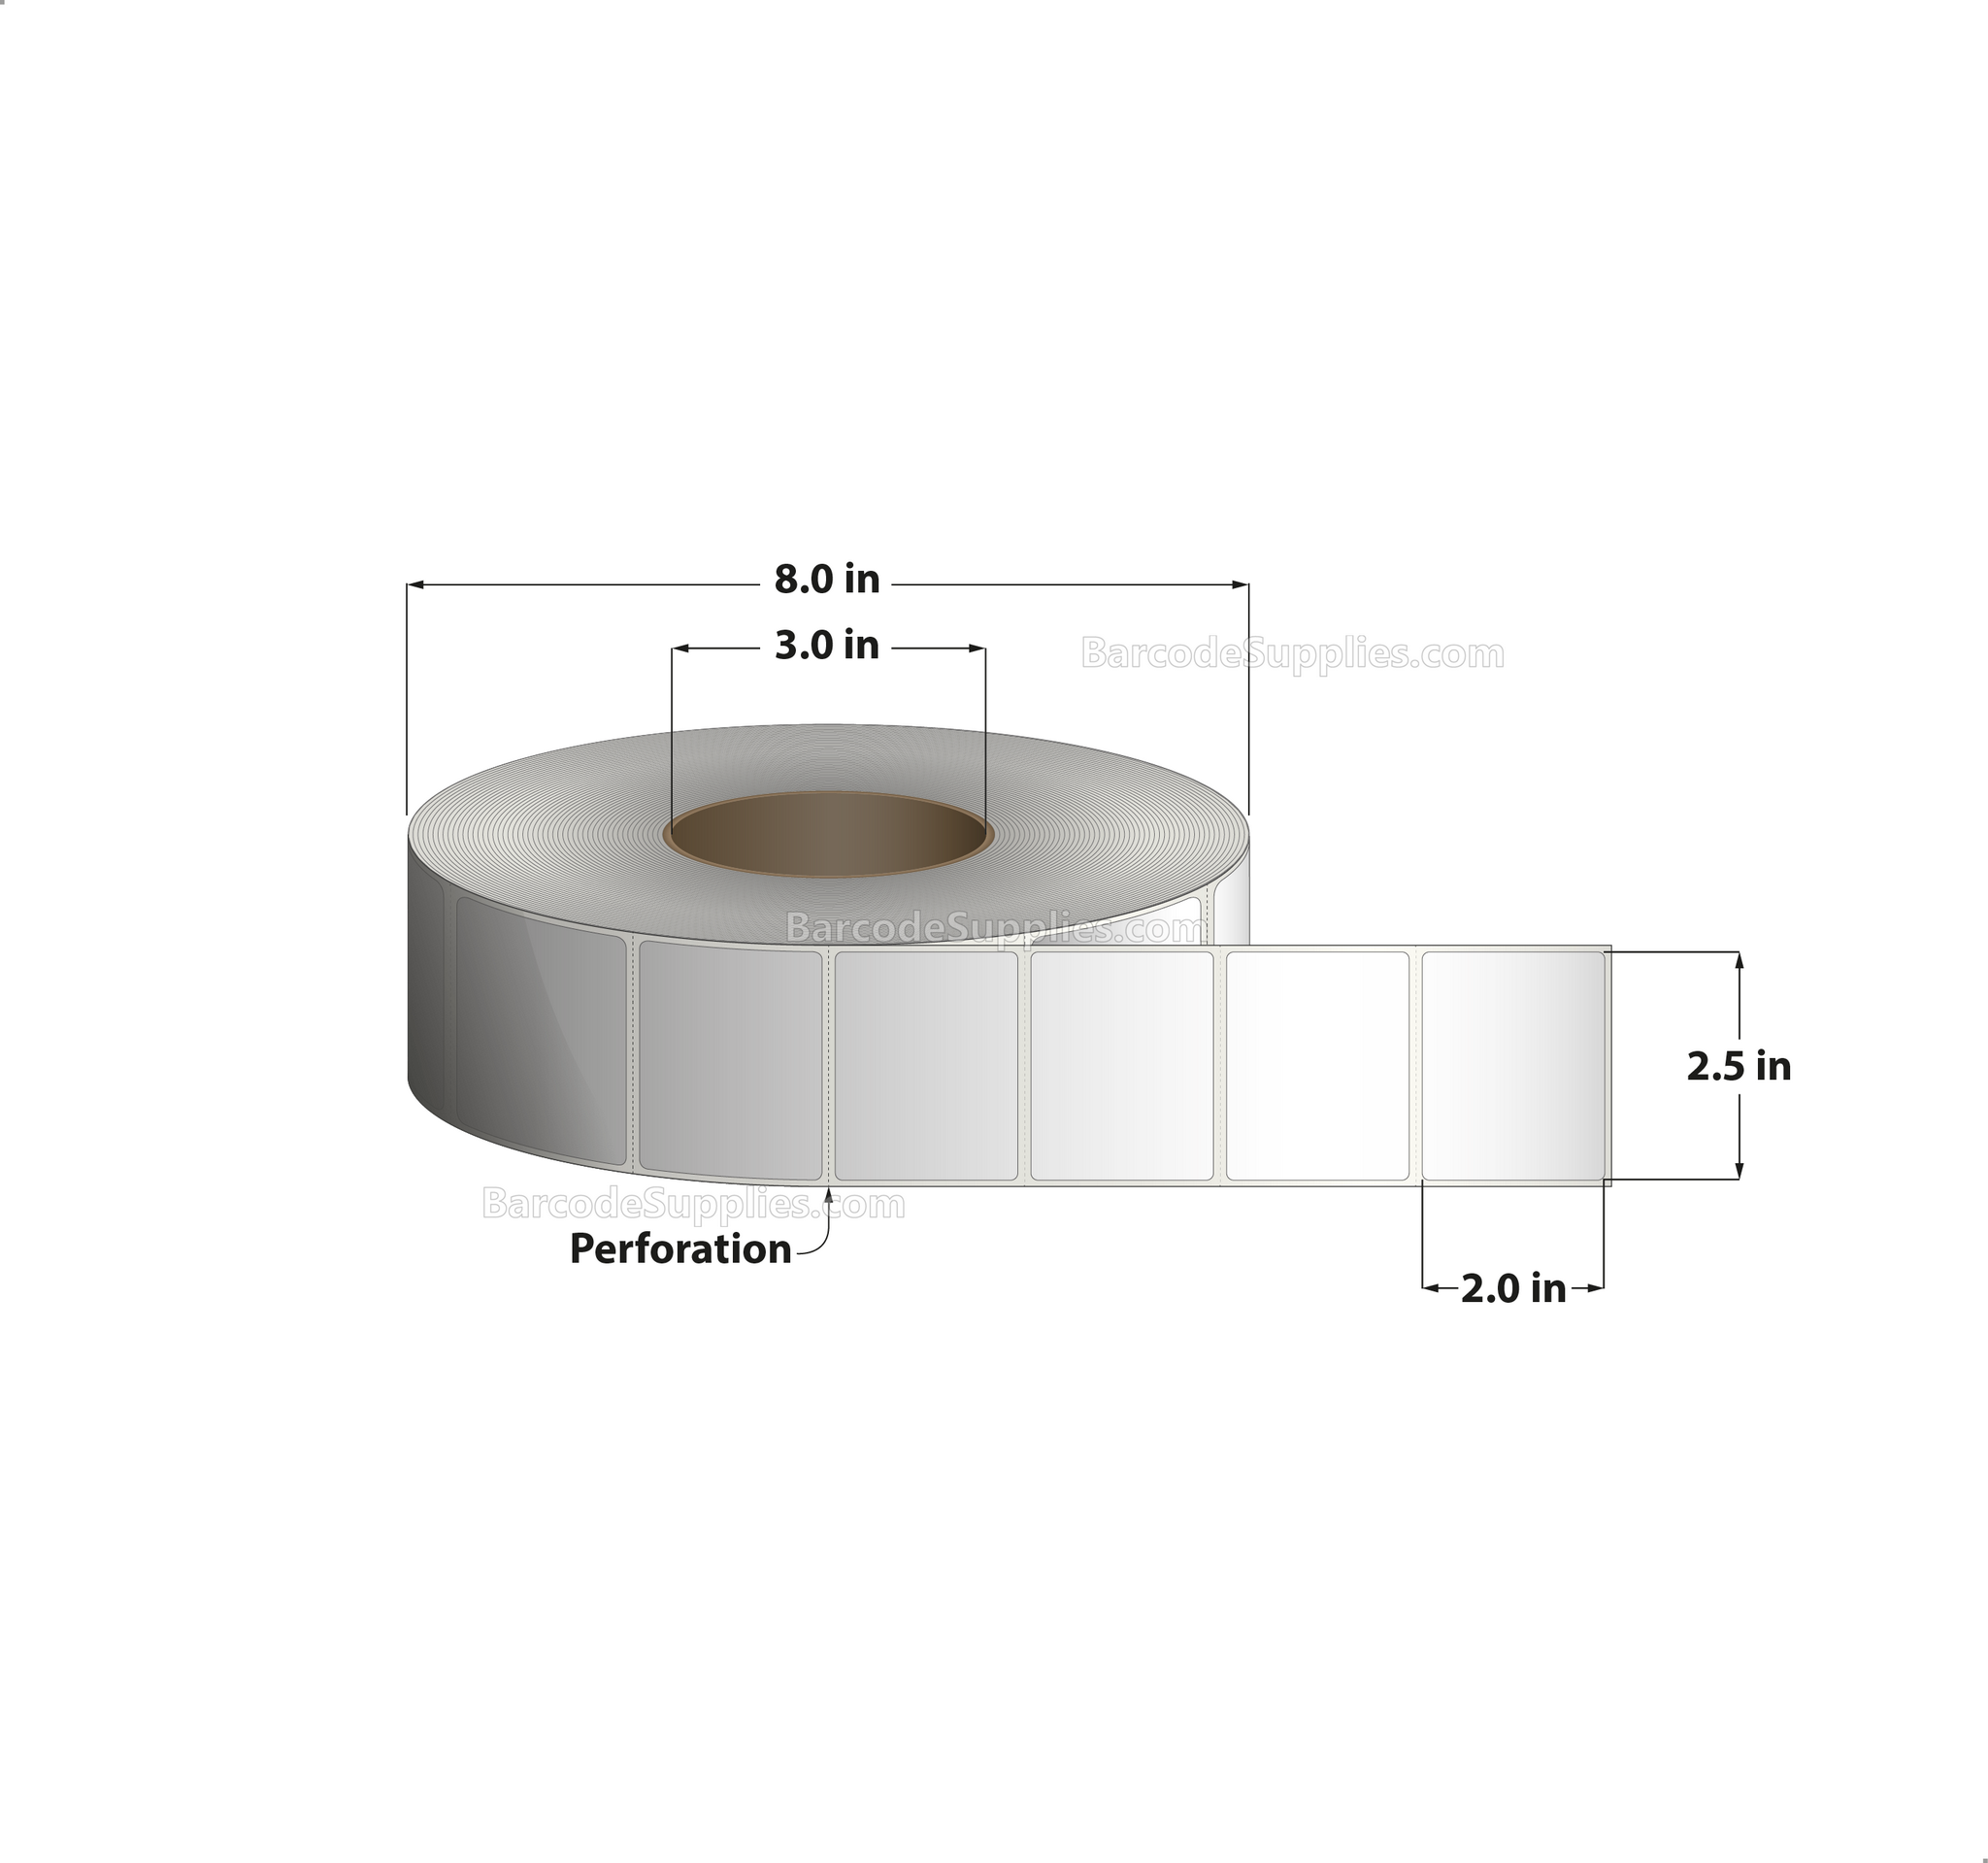 2.5 x 2 Thermal Transfer White Labels With Permanent Adhesive - Perforated - 2900 Labels Per Roll - Carton Of 8 Rolls - 23200 Labels Total - MPN: RT-25-2-2900-3